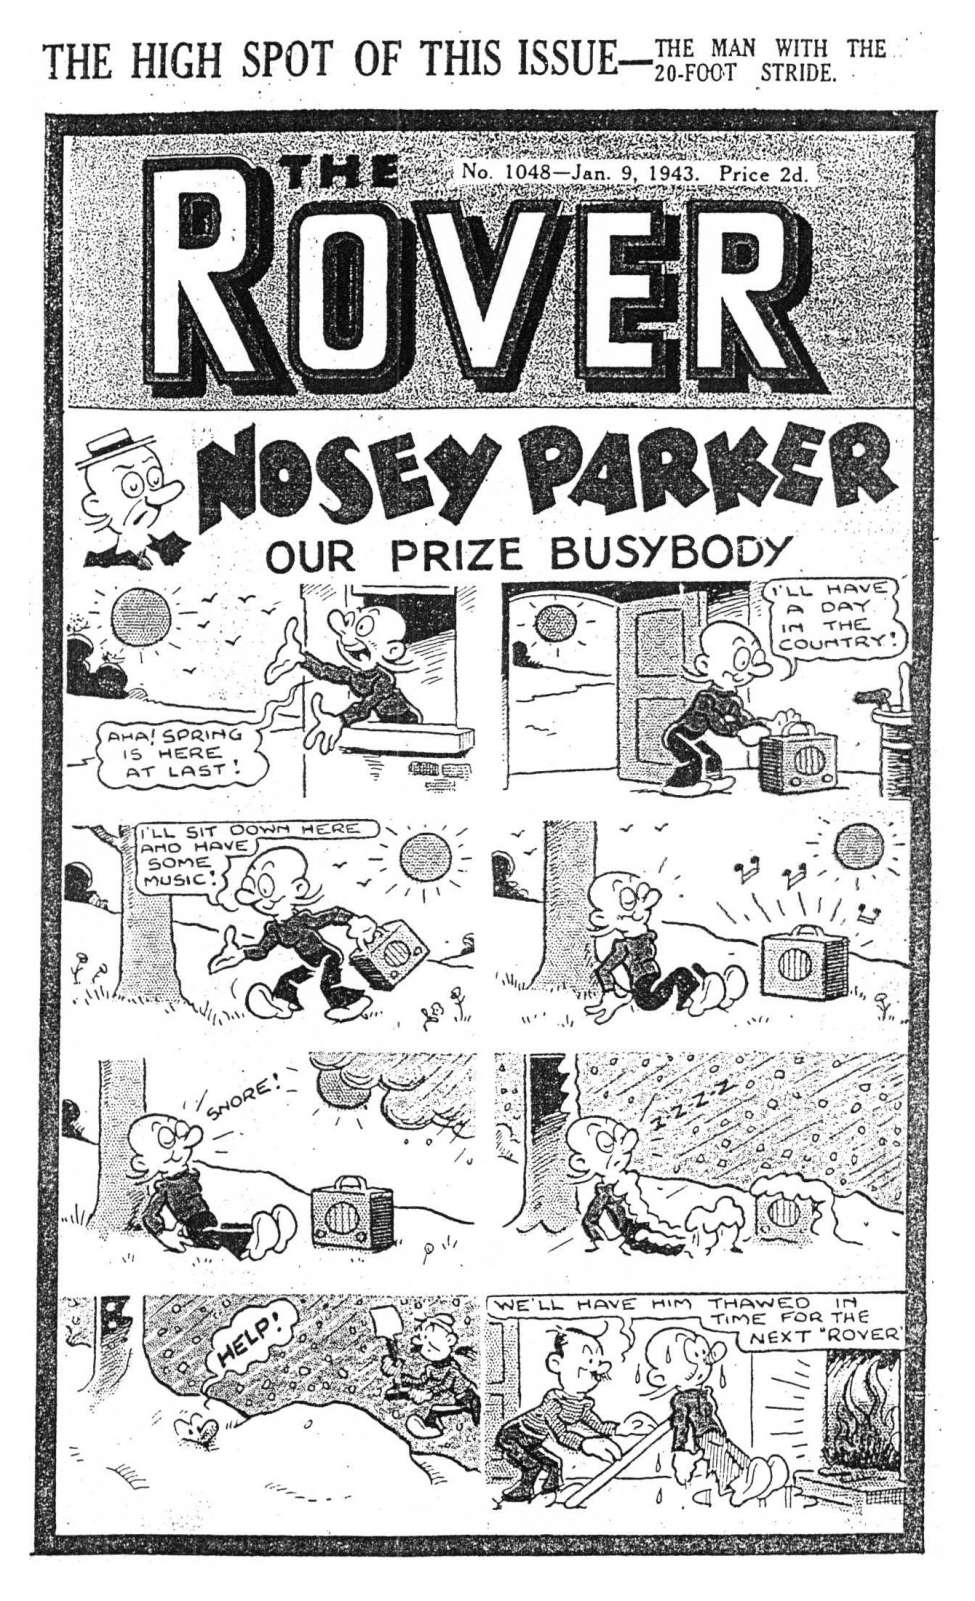 Book Cover For The Rover 1048